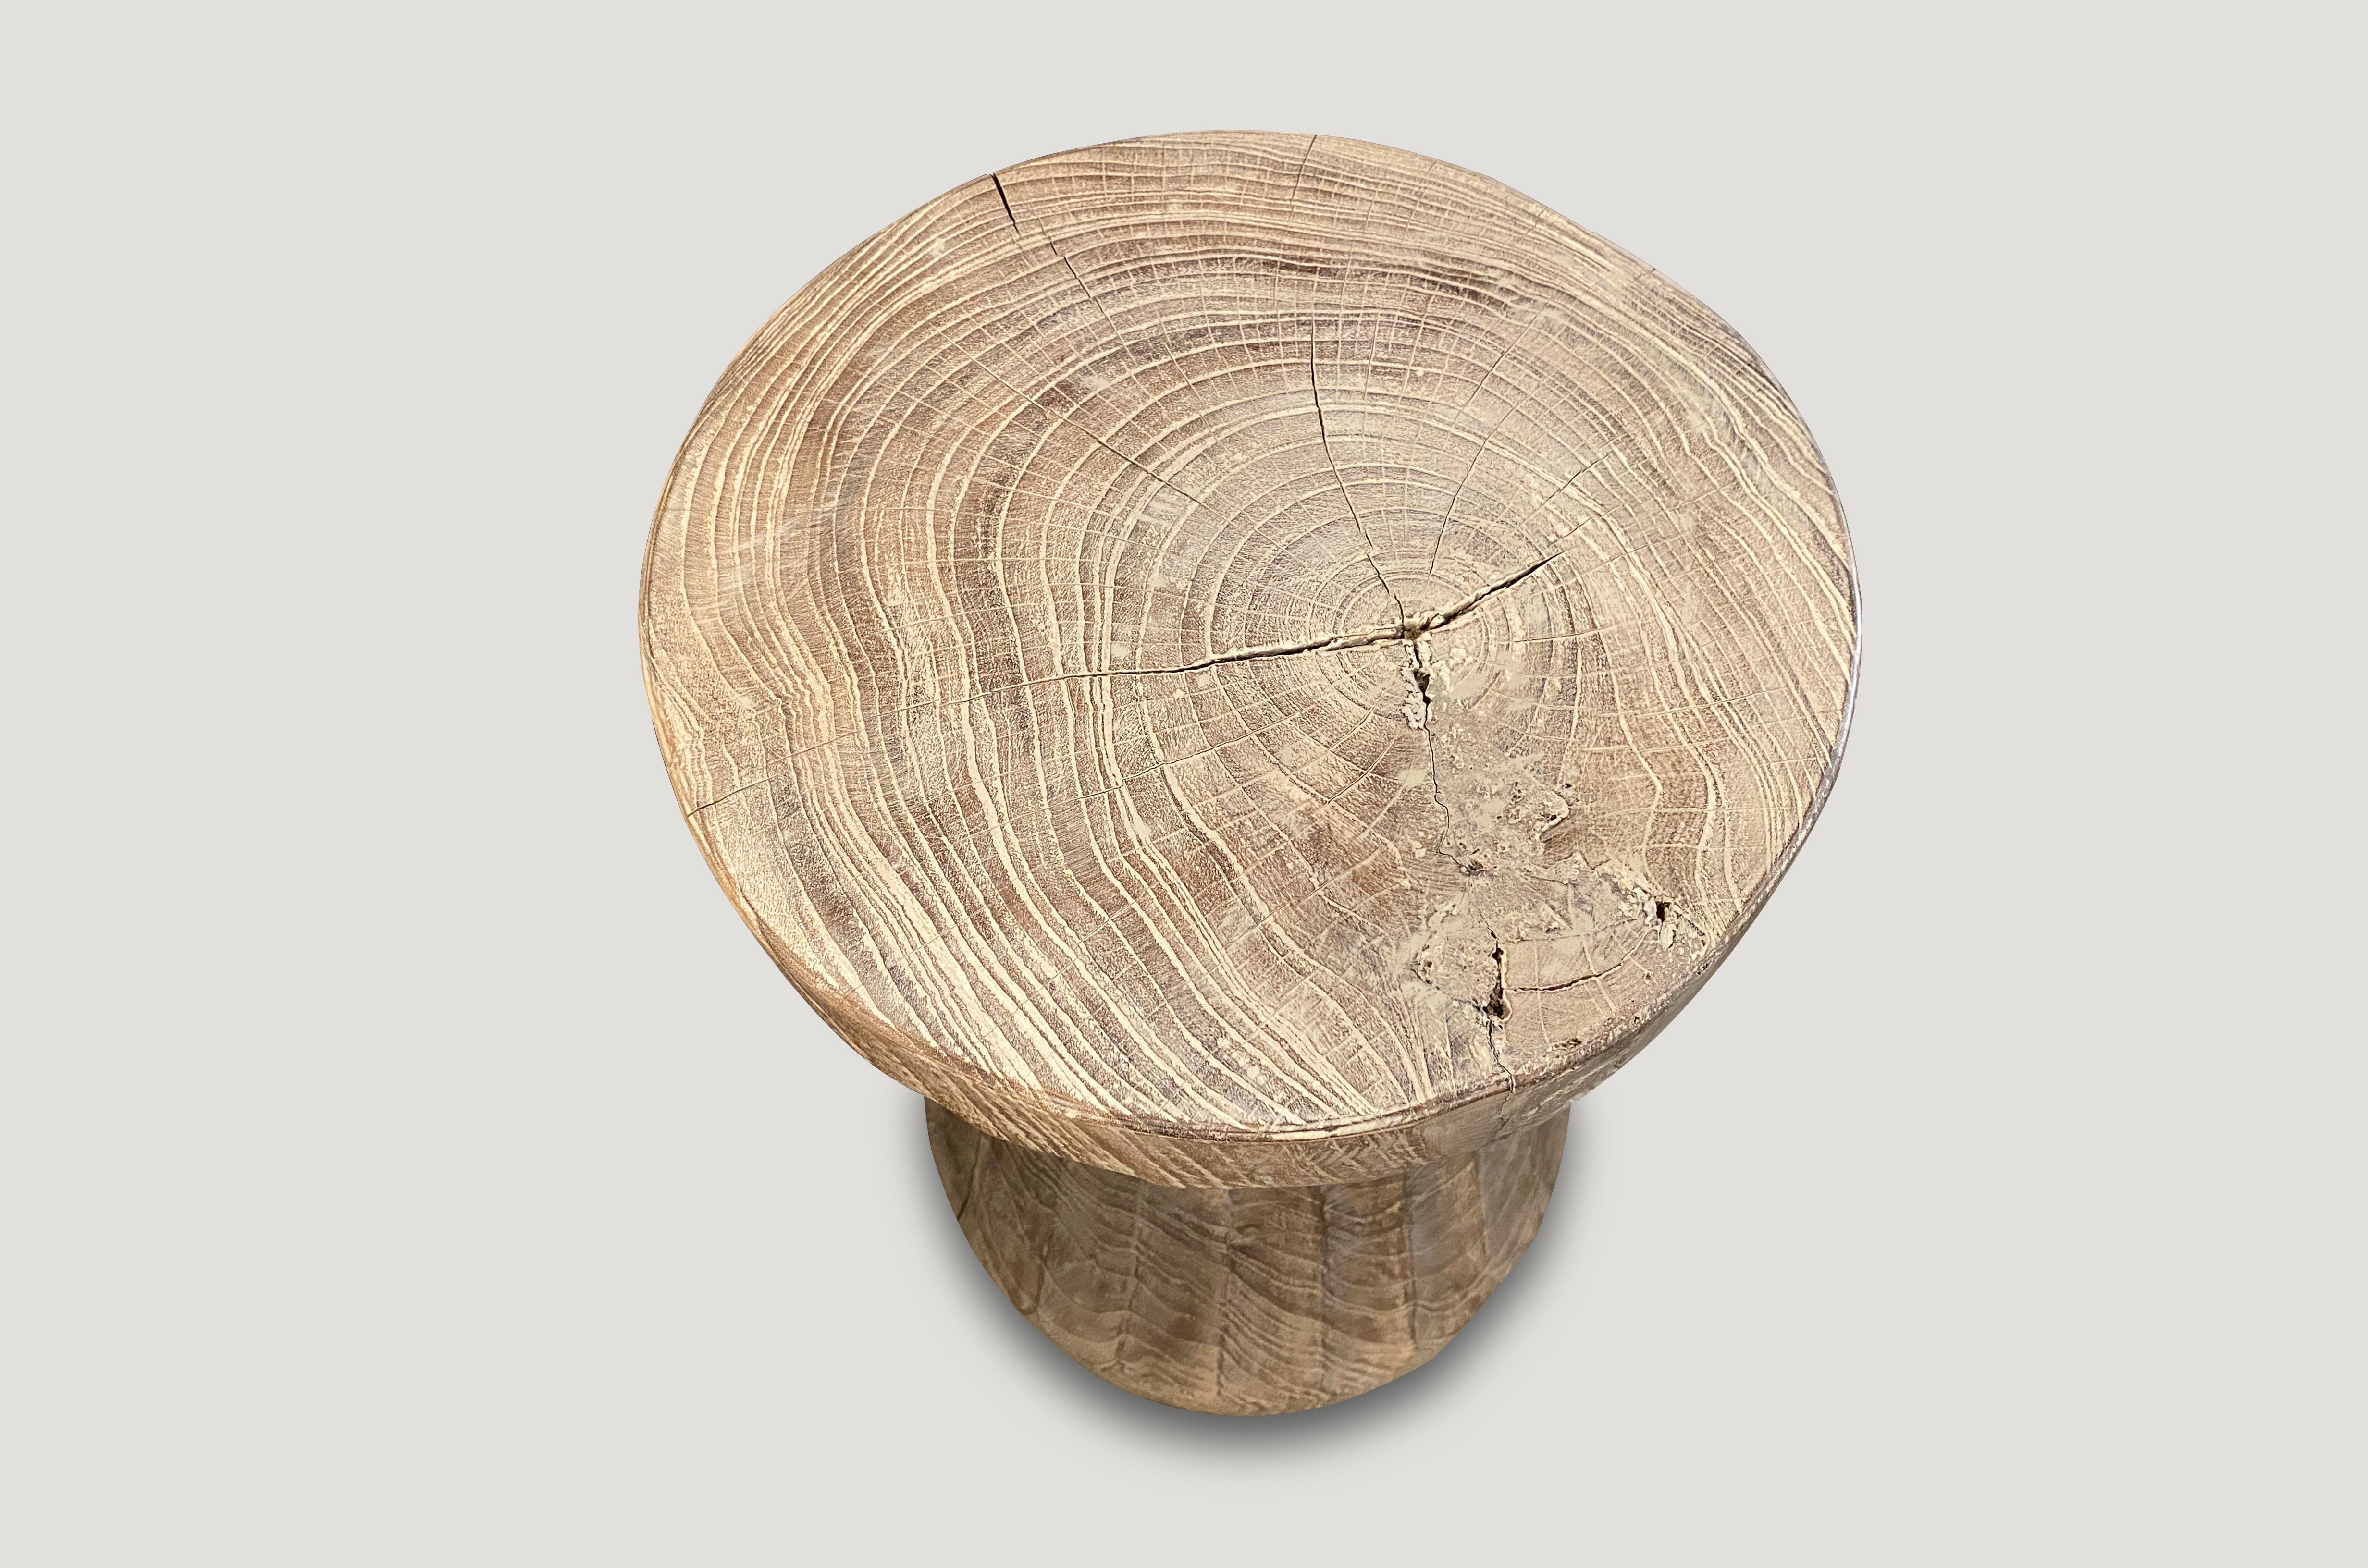 Hand carved bevelled teak side table or stool that celebrates cracks and crevices found in reclaimed teak wood. Please scroll down to the last image which we produced for 1Hotel Miami Beach. Perfect for inside or outside living. Custom stains